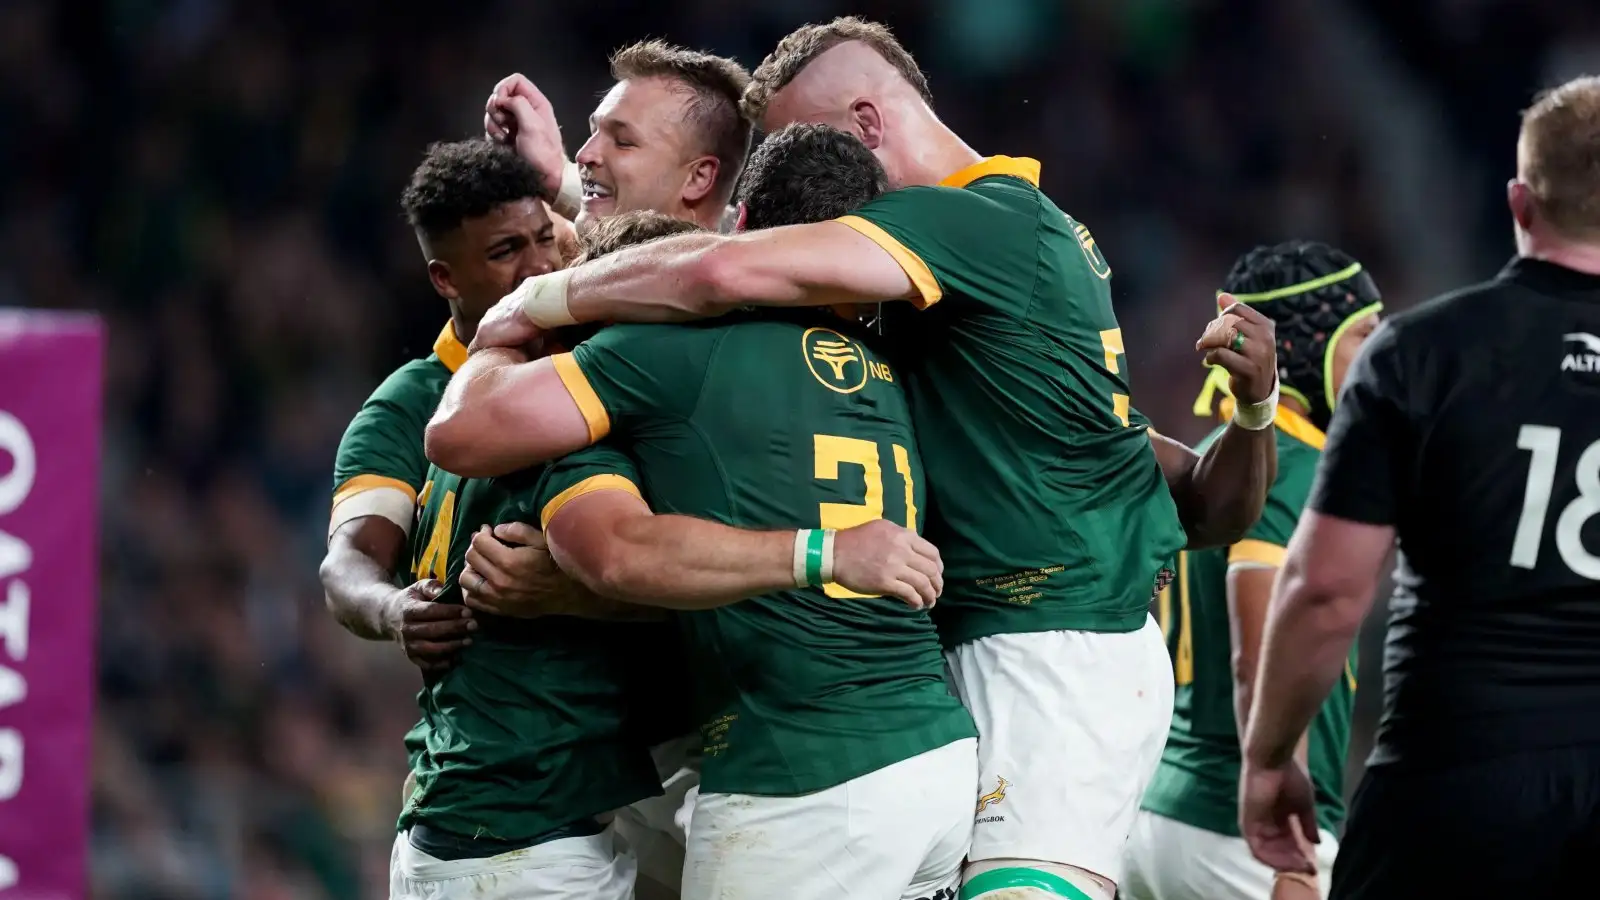 Springbok players celebrate a try against New Zealand.